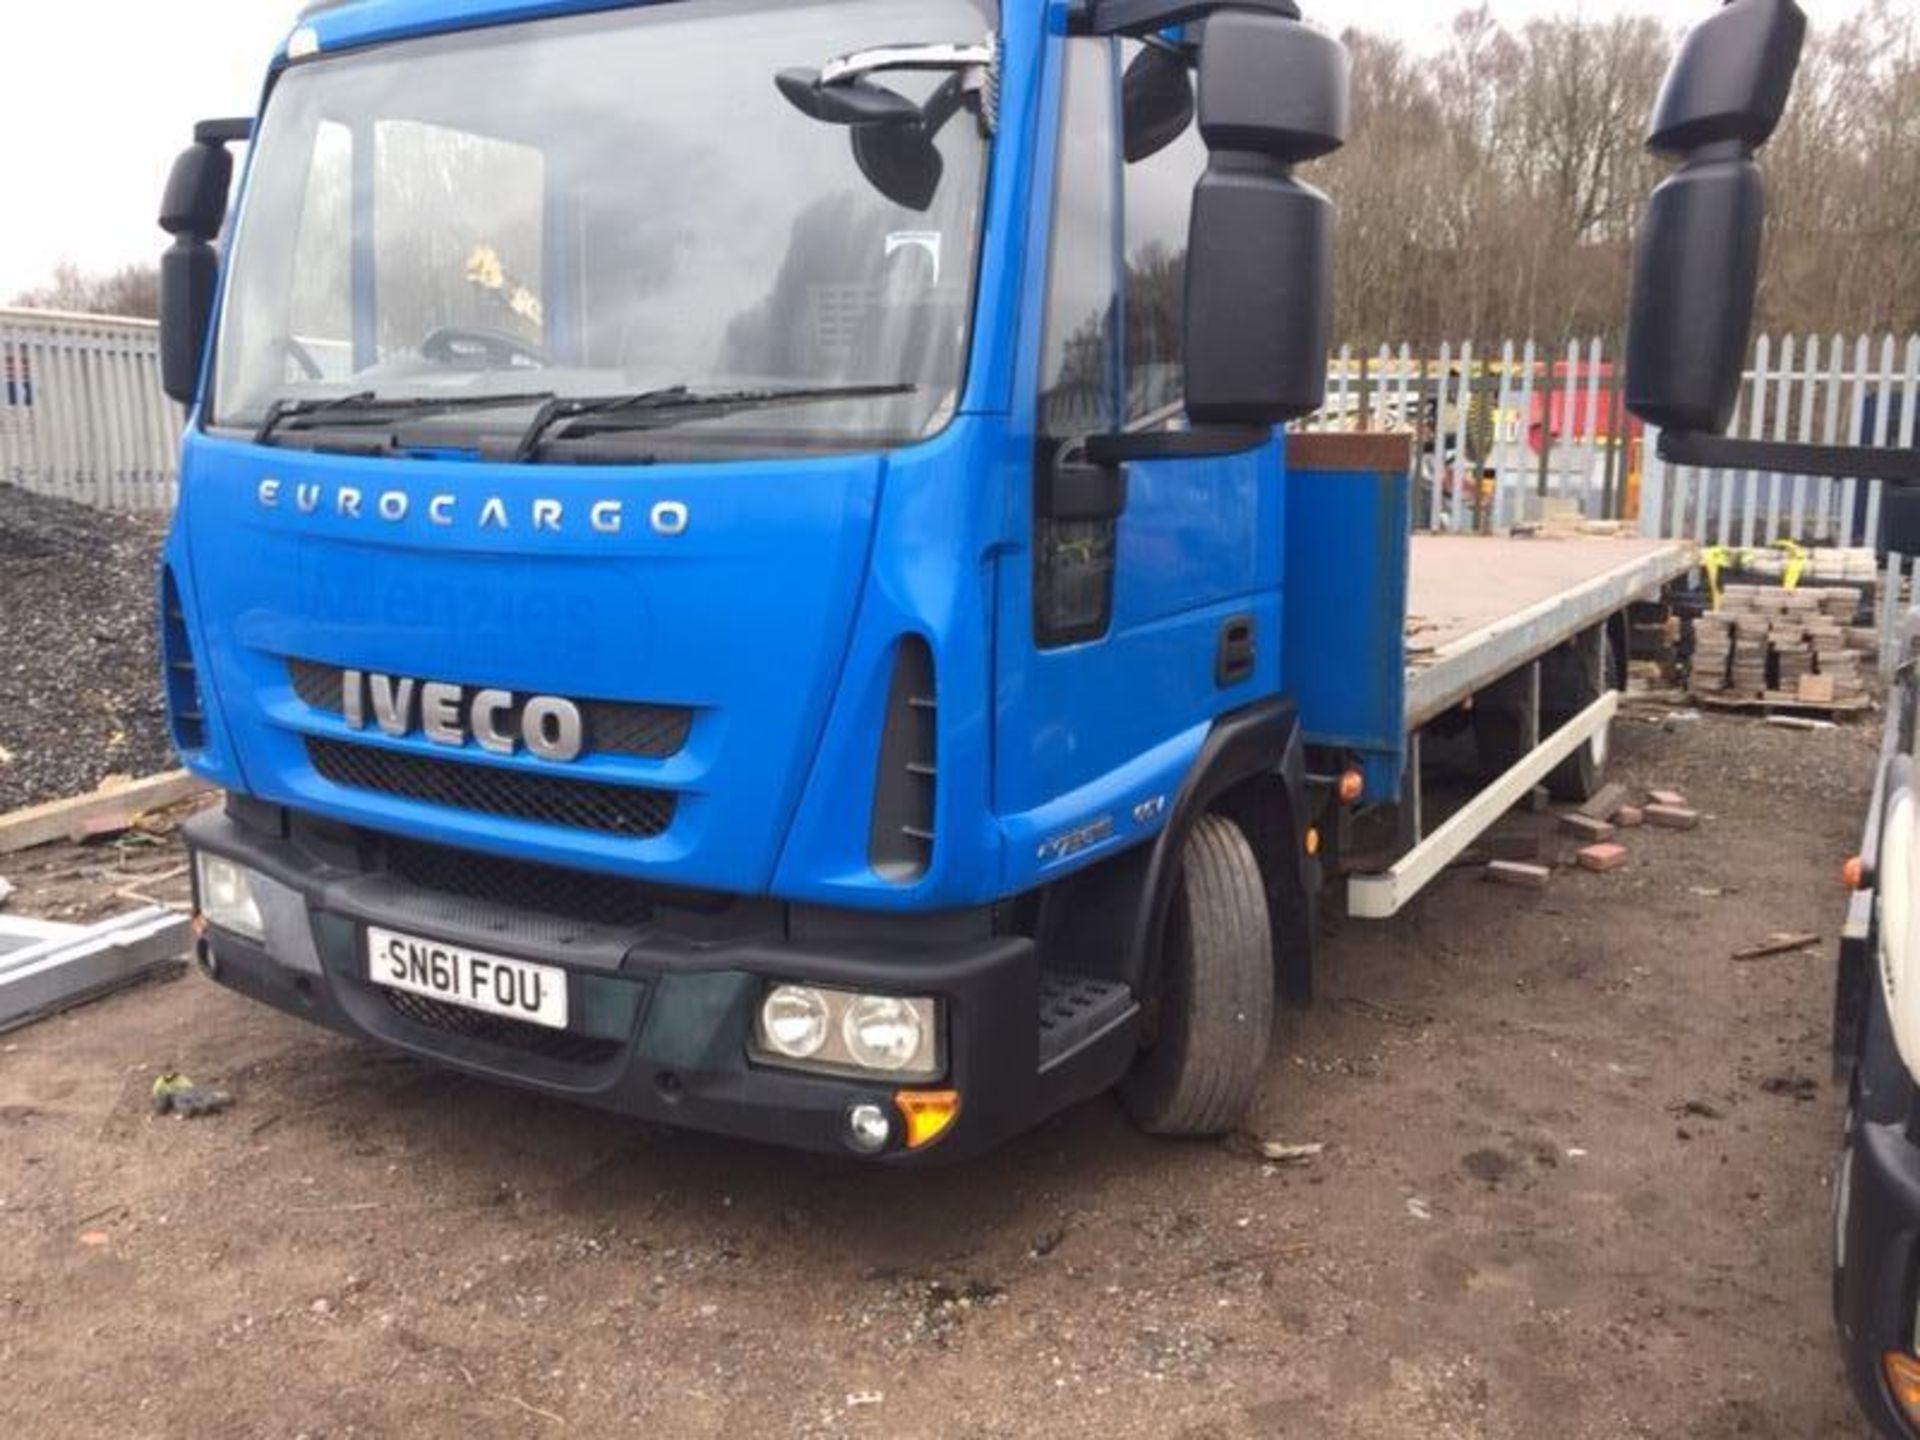 2 x Iveco 7 .12 Ton, Non Runners - Image 2 of 2